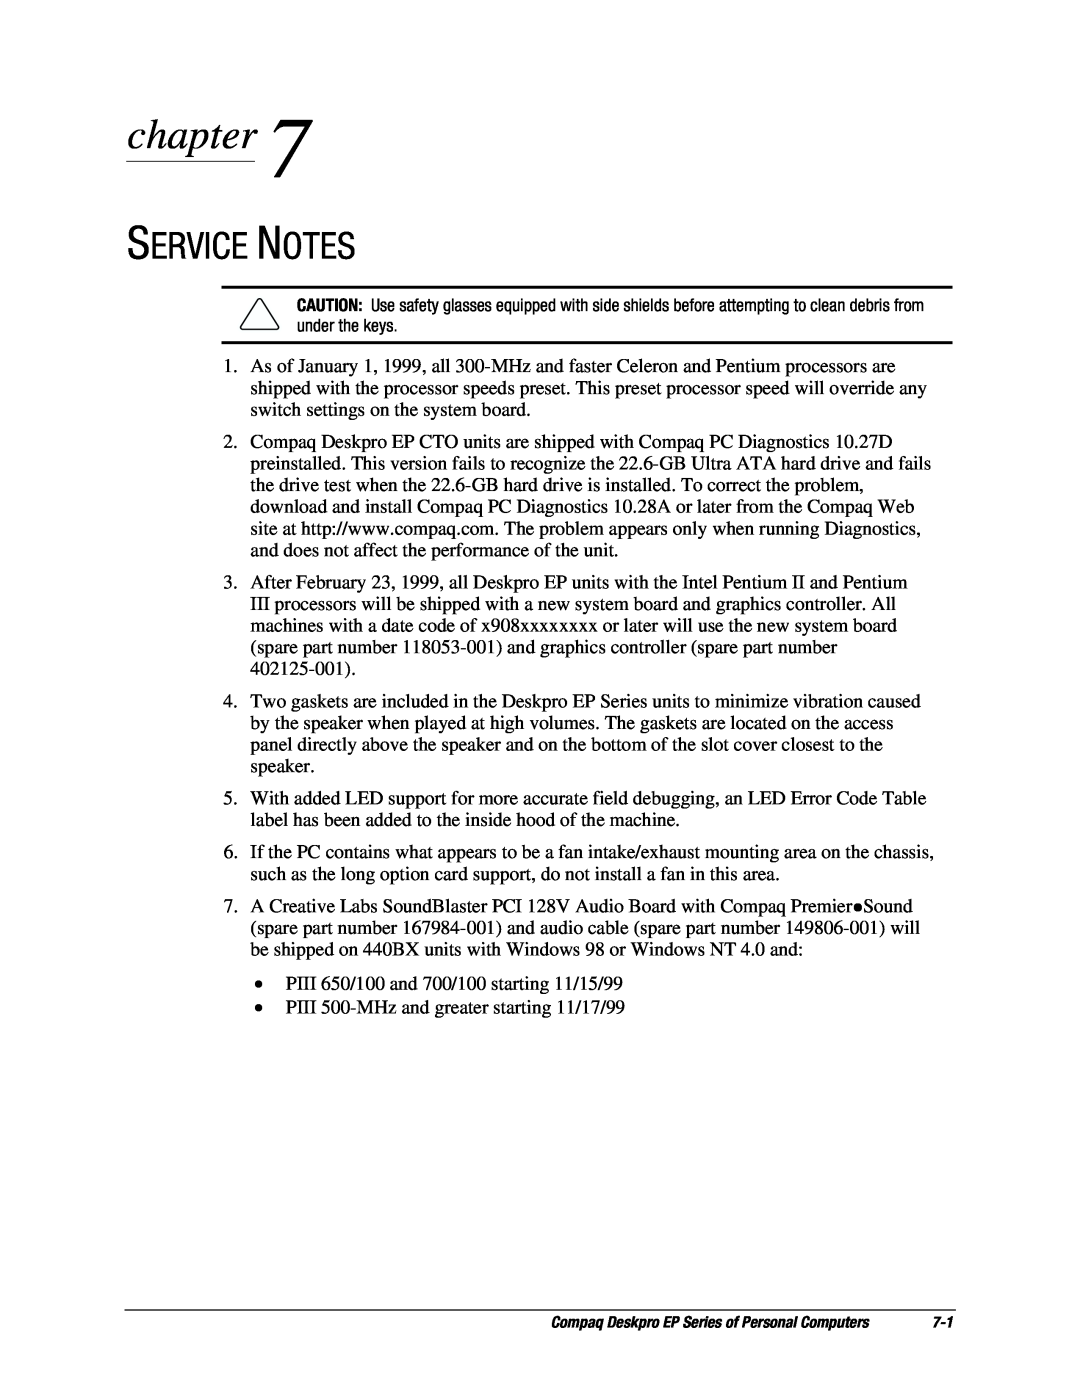 Compaq EP Series manual Service Notes, chapter 